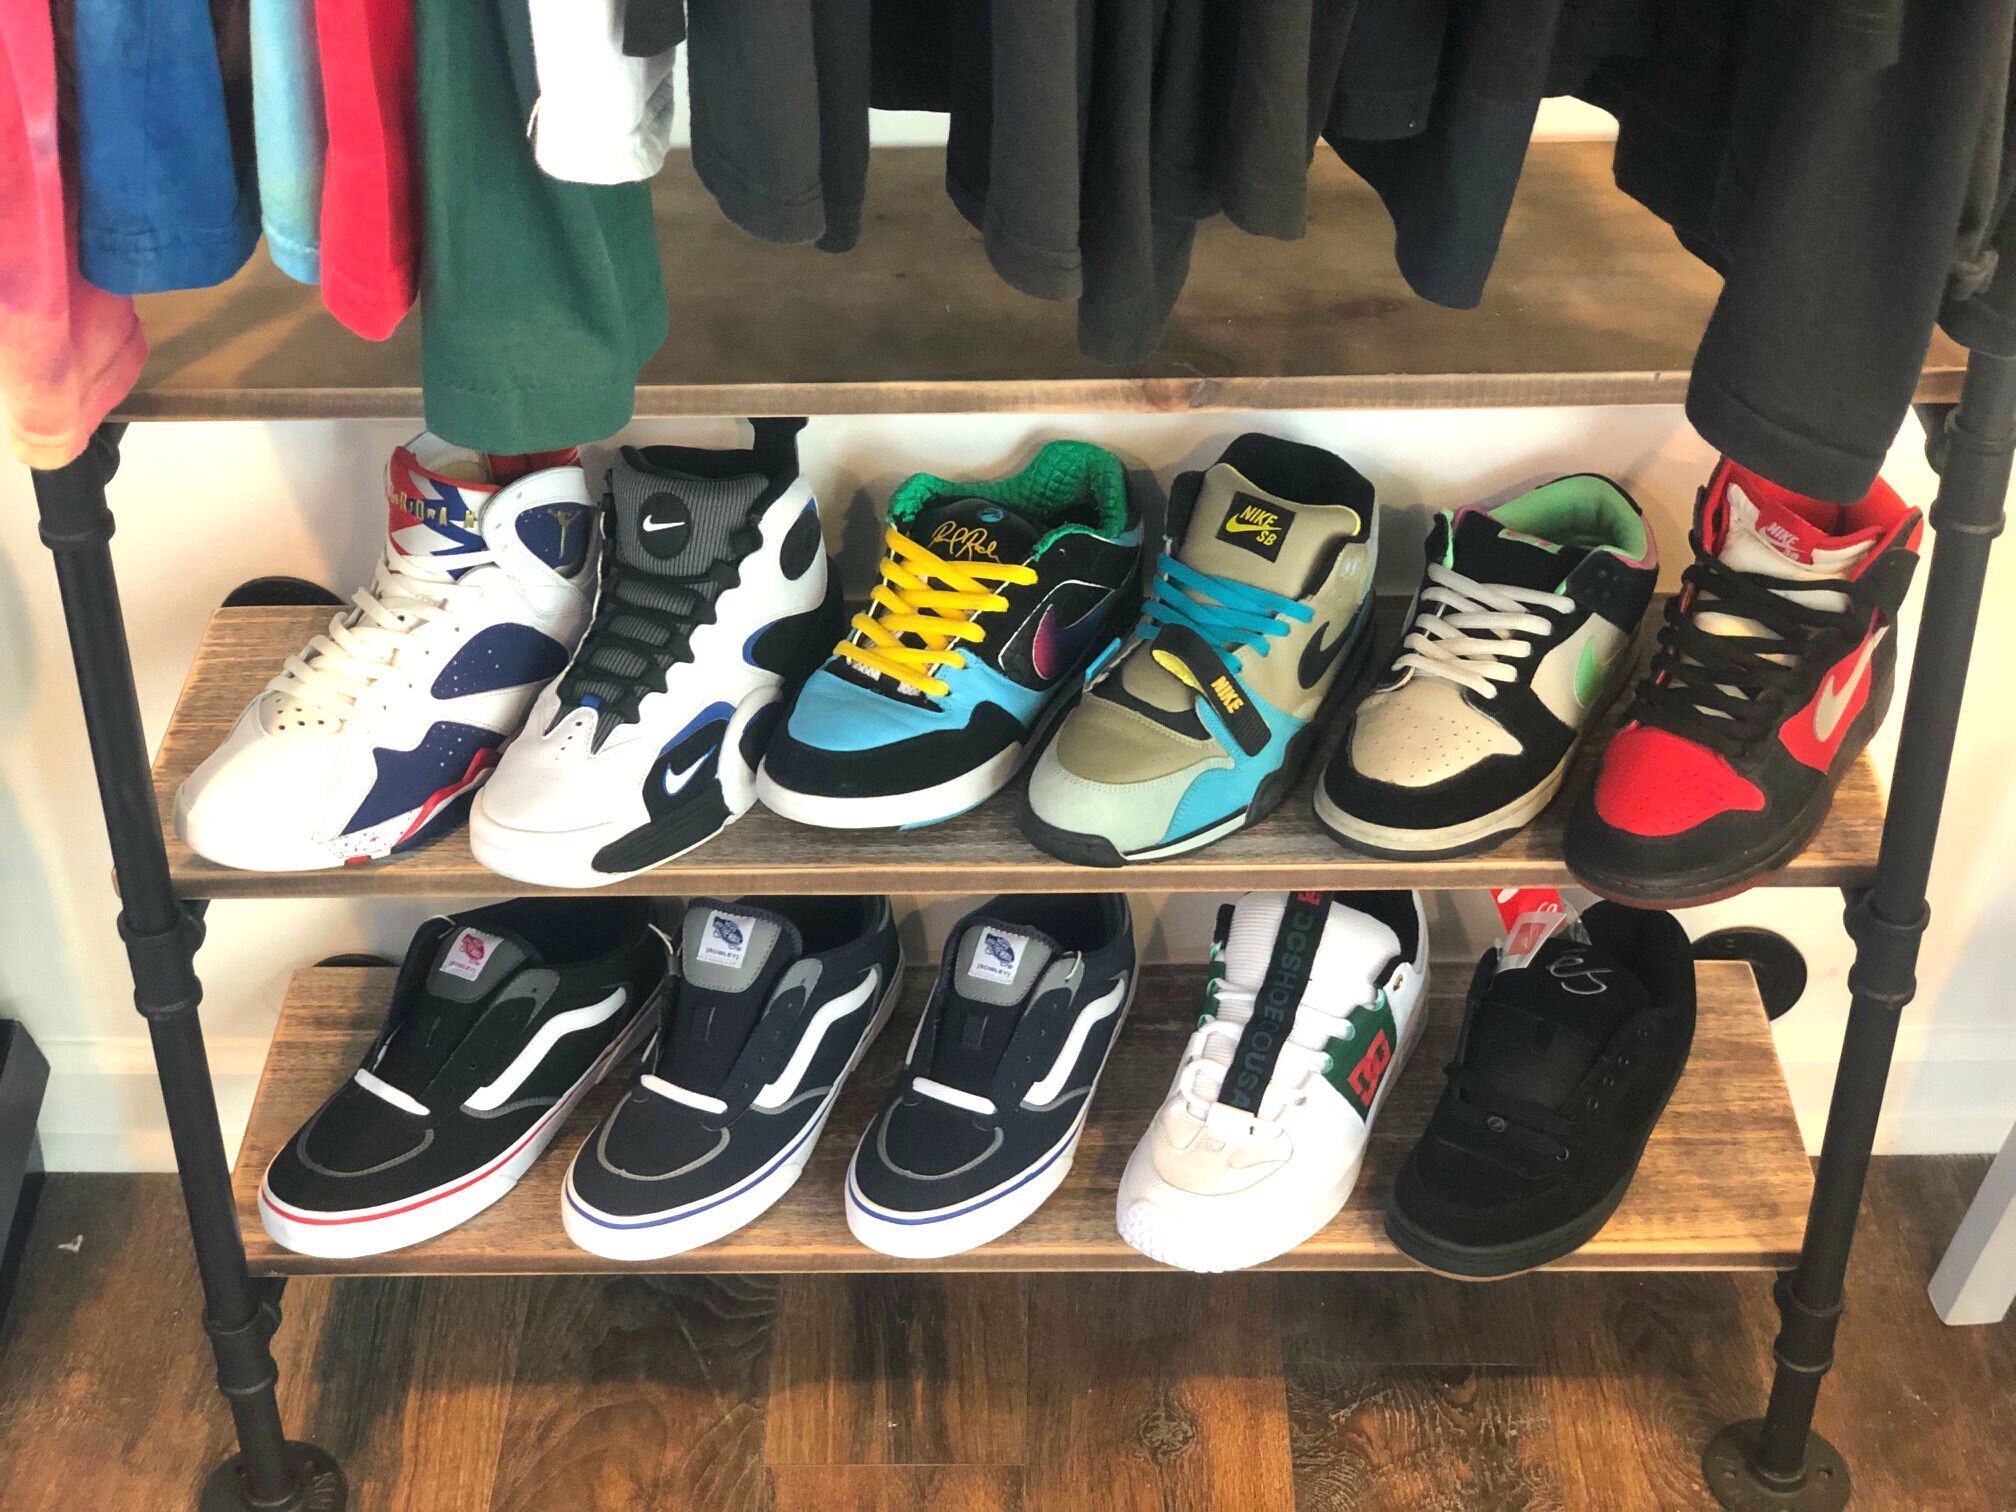 A rack of vintage sneakers on display at Majik & Co., one of the two local retailers located inside BOXLOT. (Chris Jones)